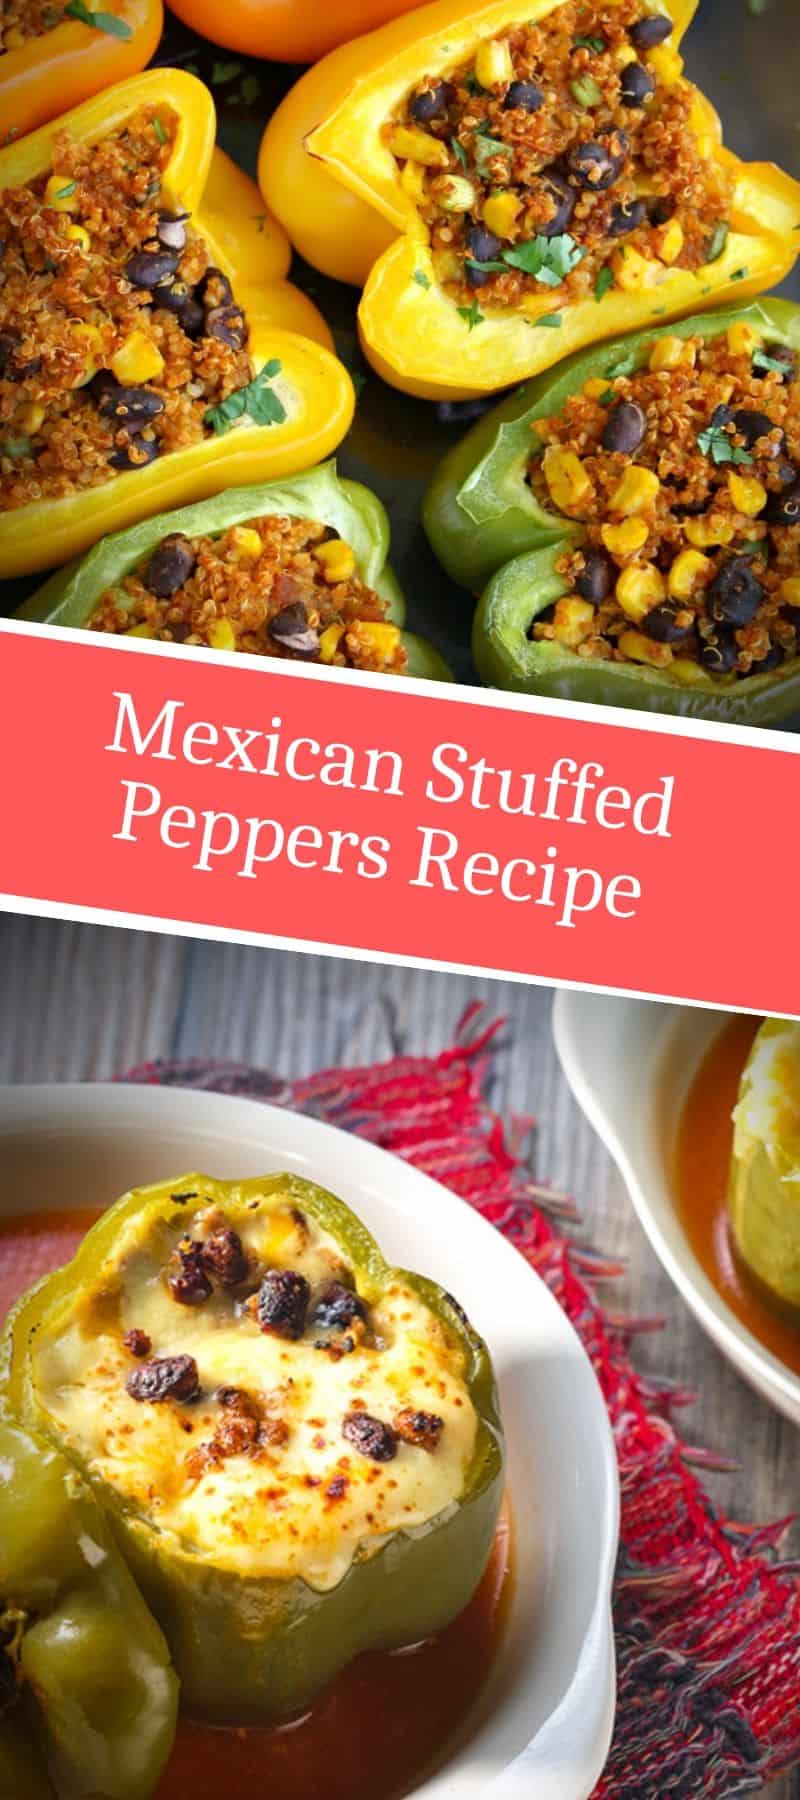 Mexican Stuffed Peppers Recipe 2